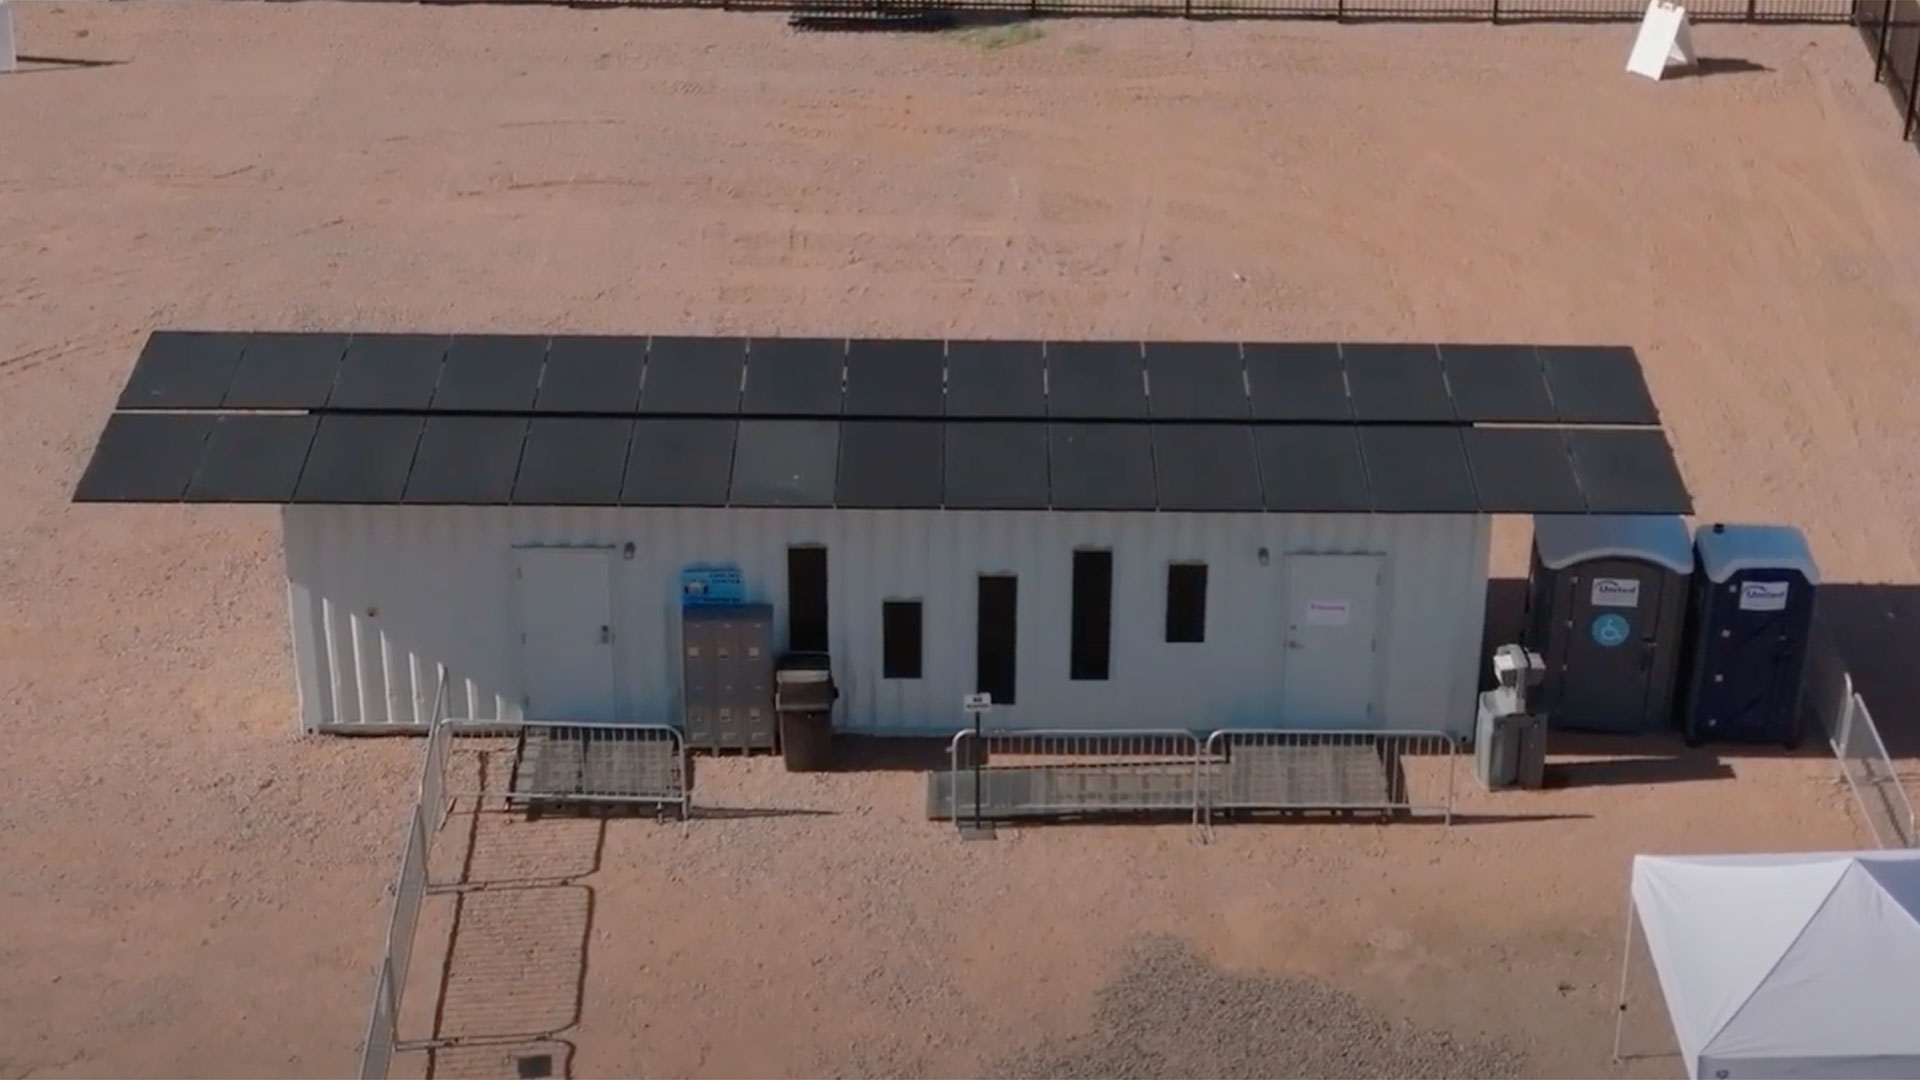 A shipping container repurposed as a cooling center for unhoused individuals in Phoenix, Ariz. 